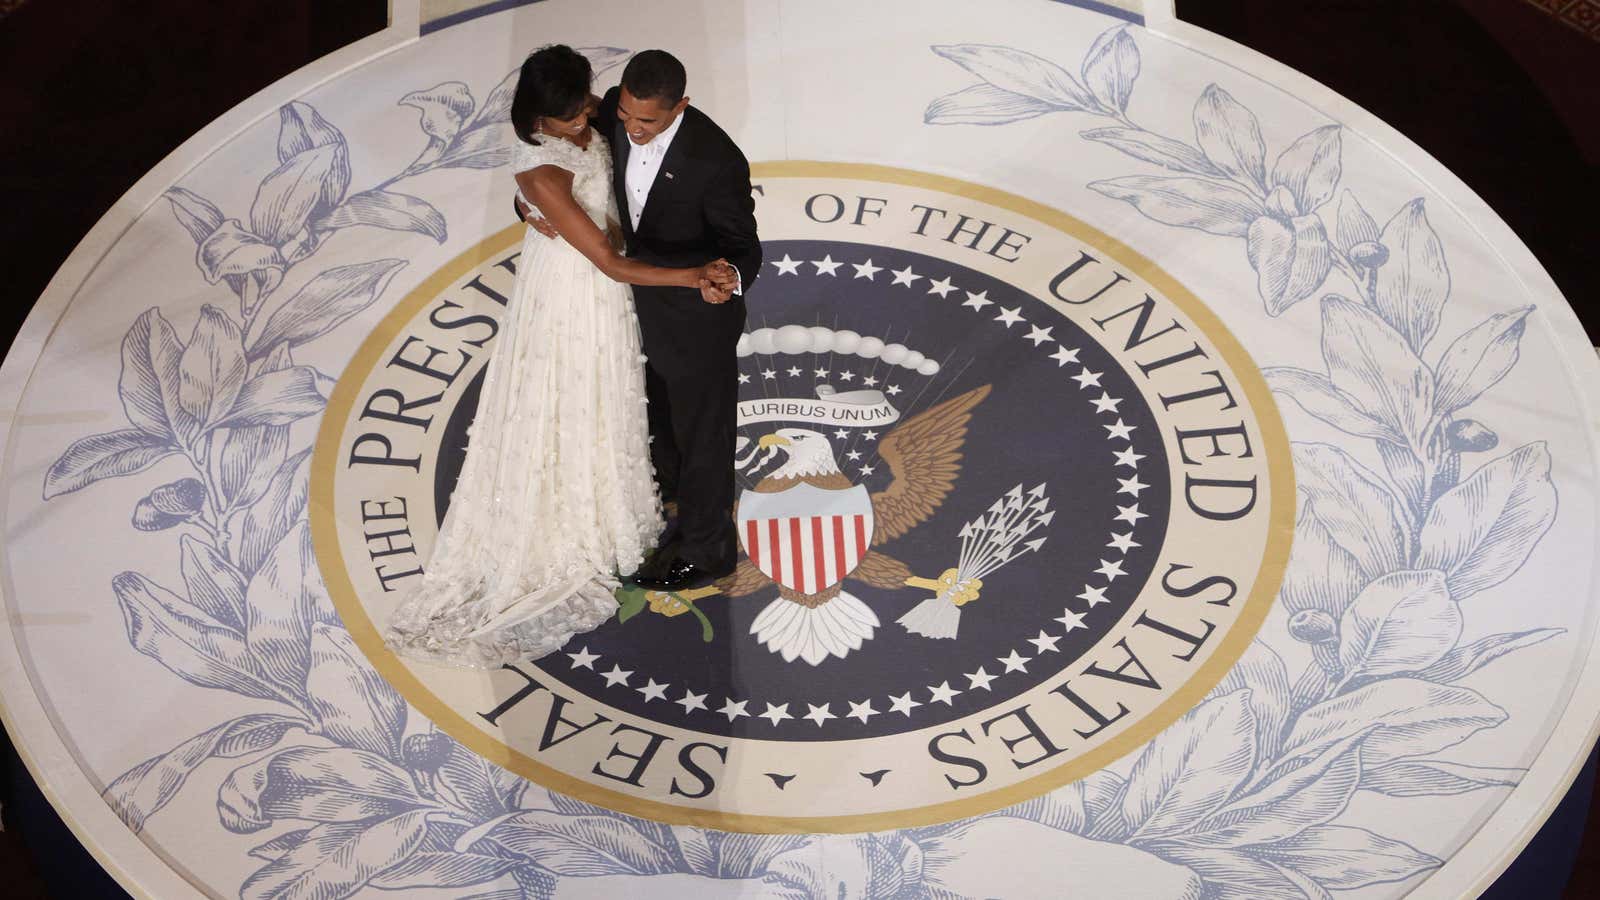 Waltzing out of the White House.